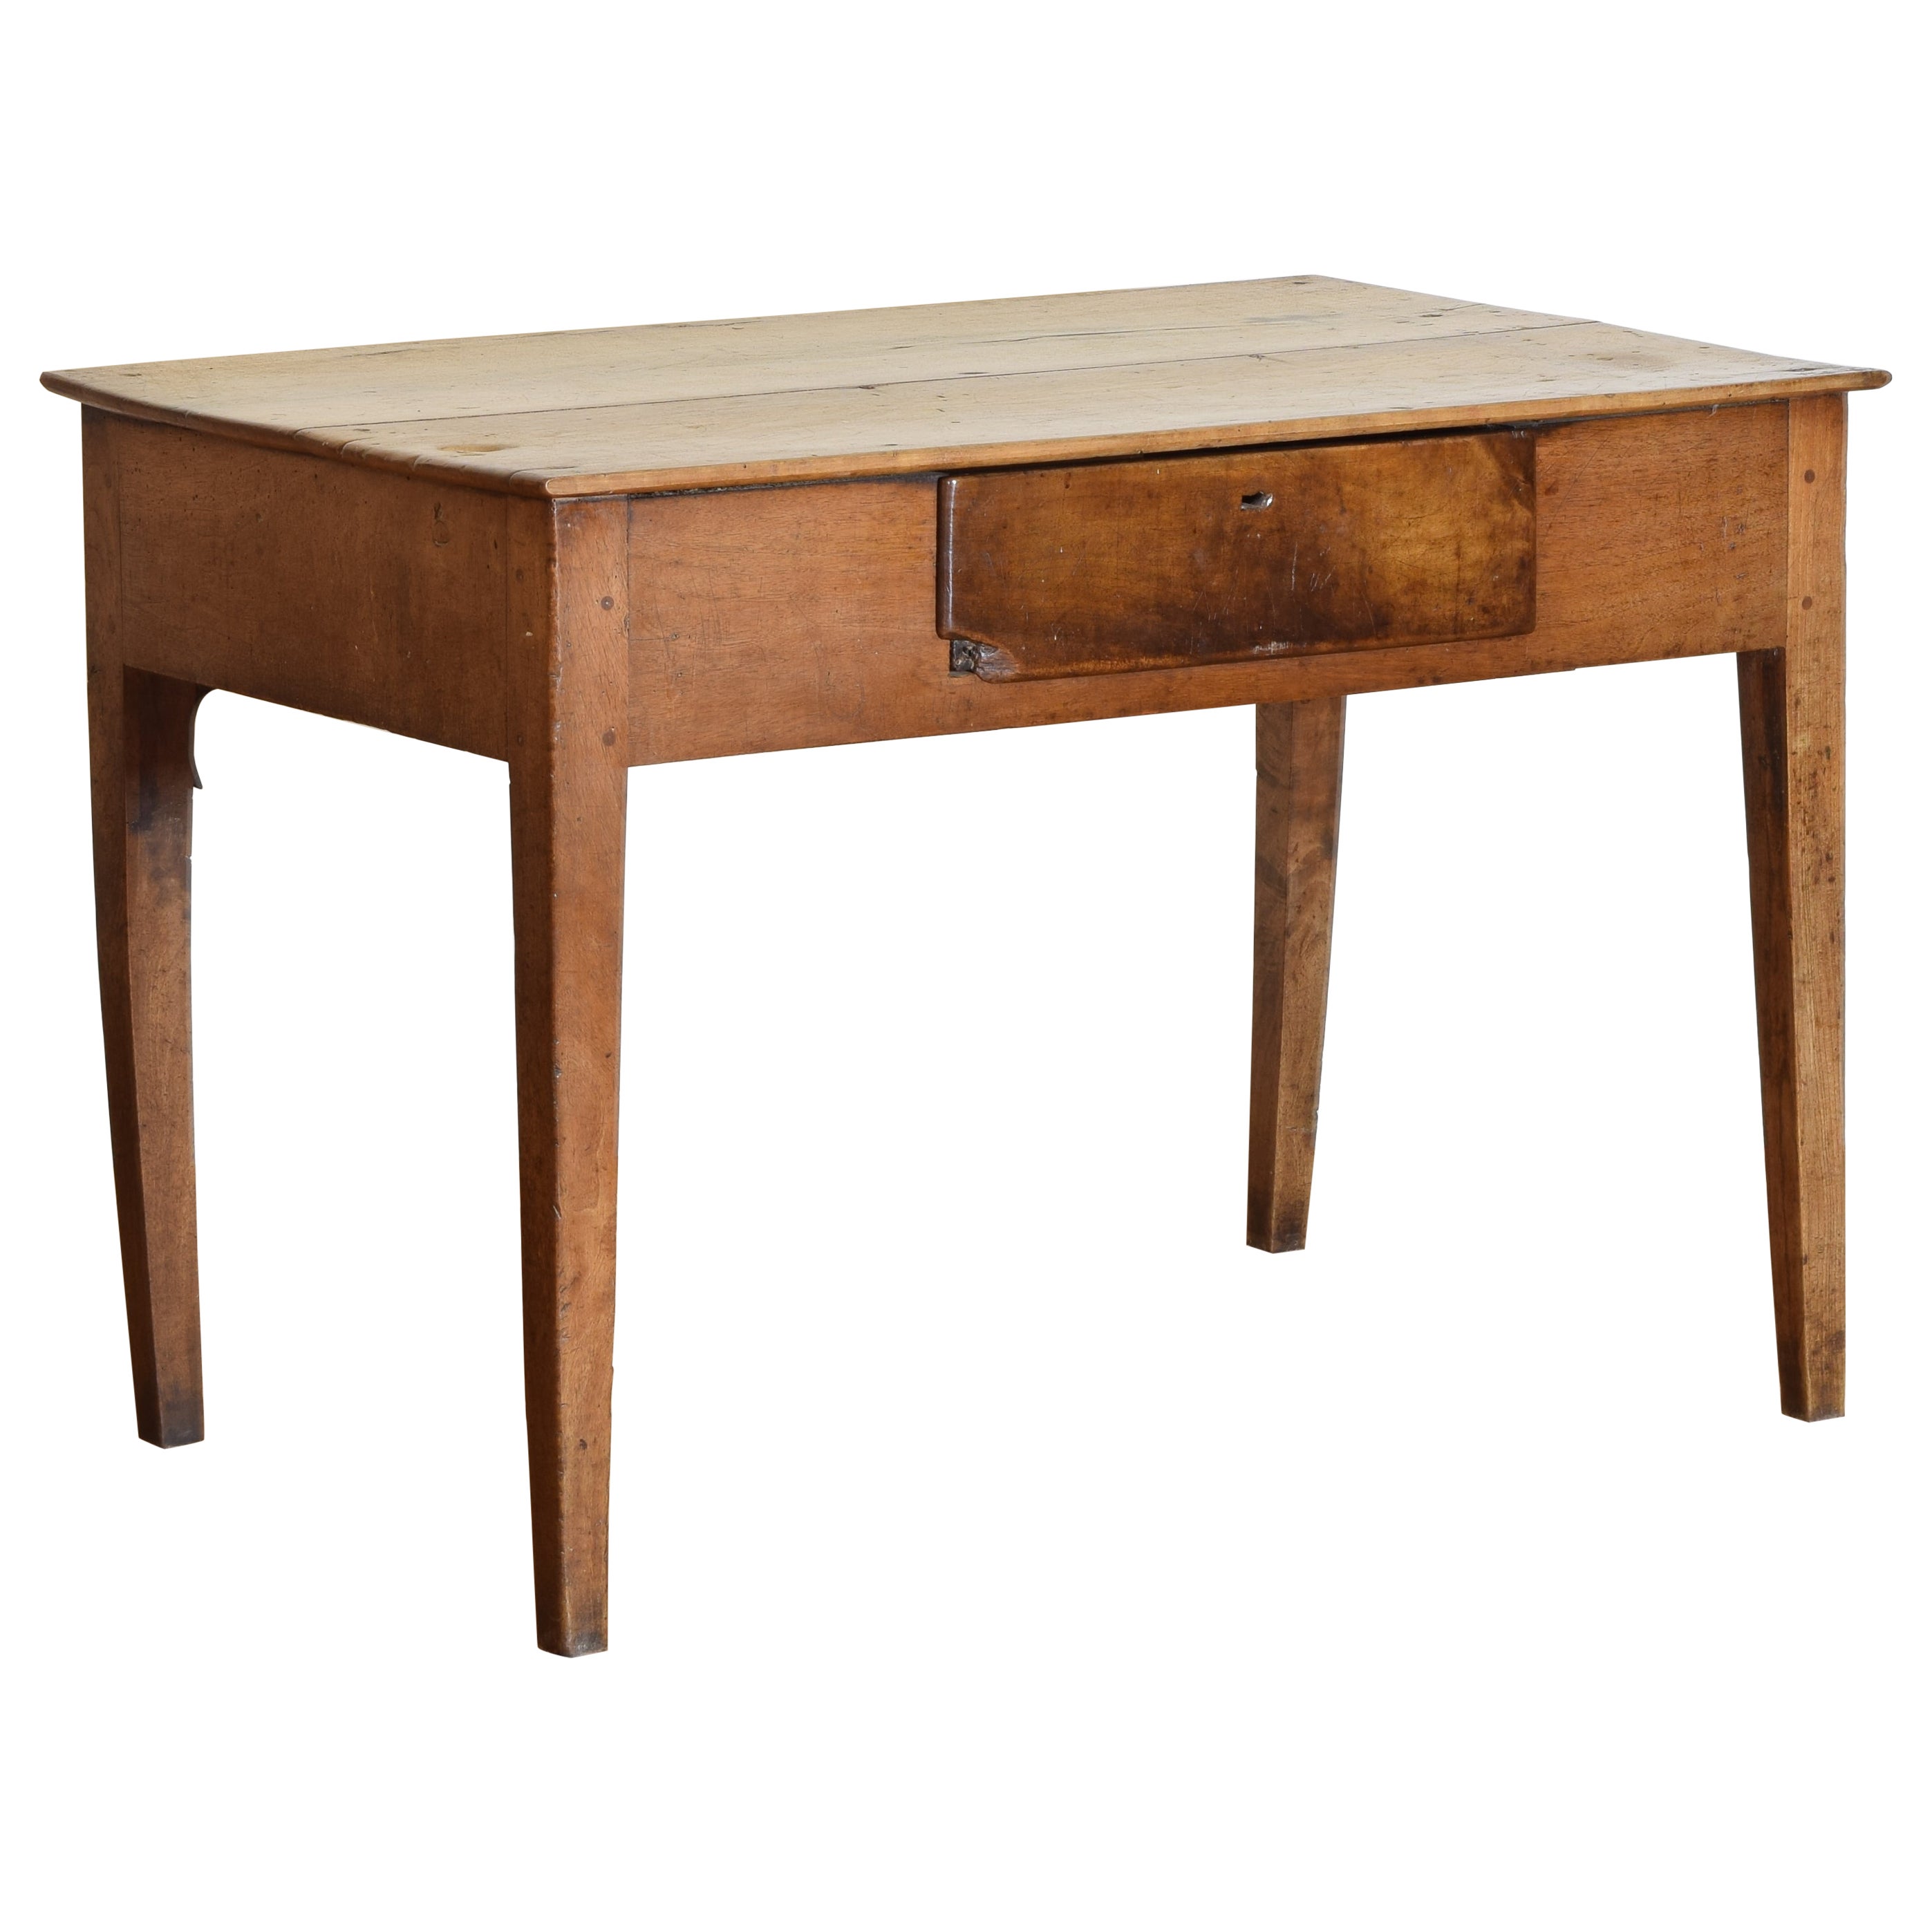 Spanish Rustic Neoclassic Faded Walnut 1-Drawer Table, early 19th century For Sale